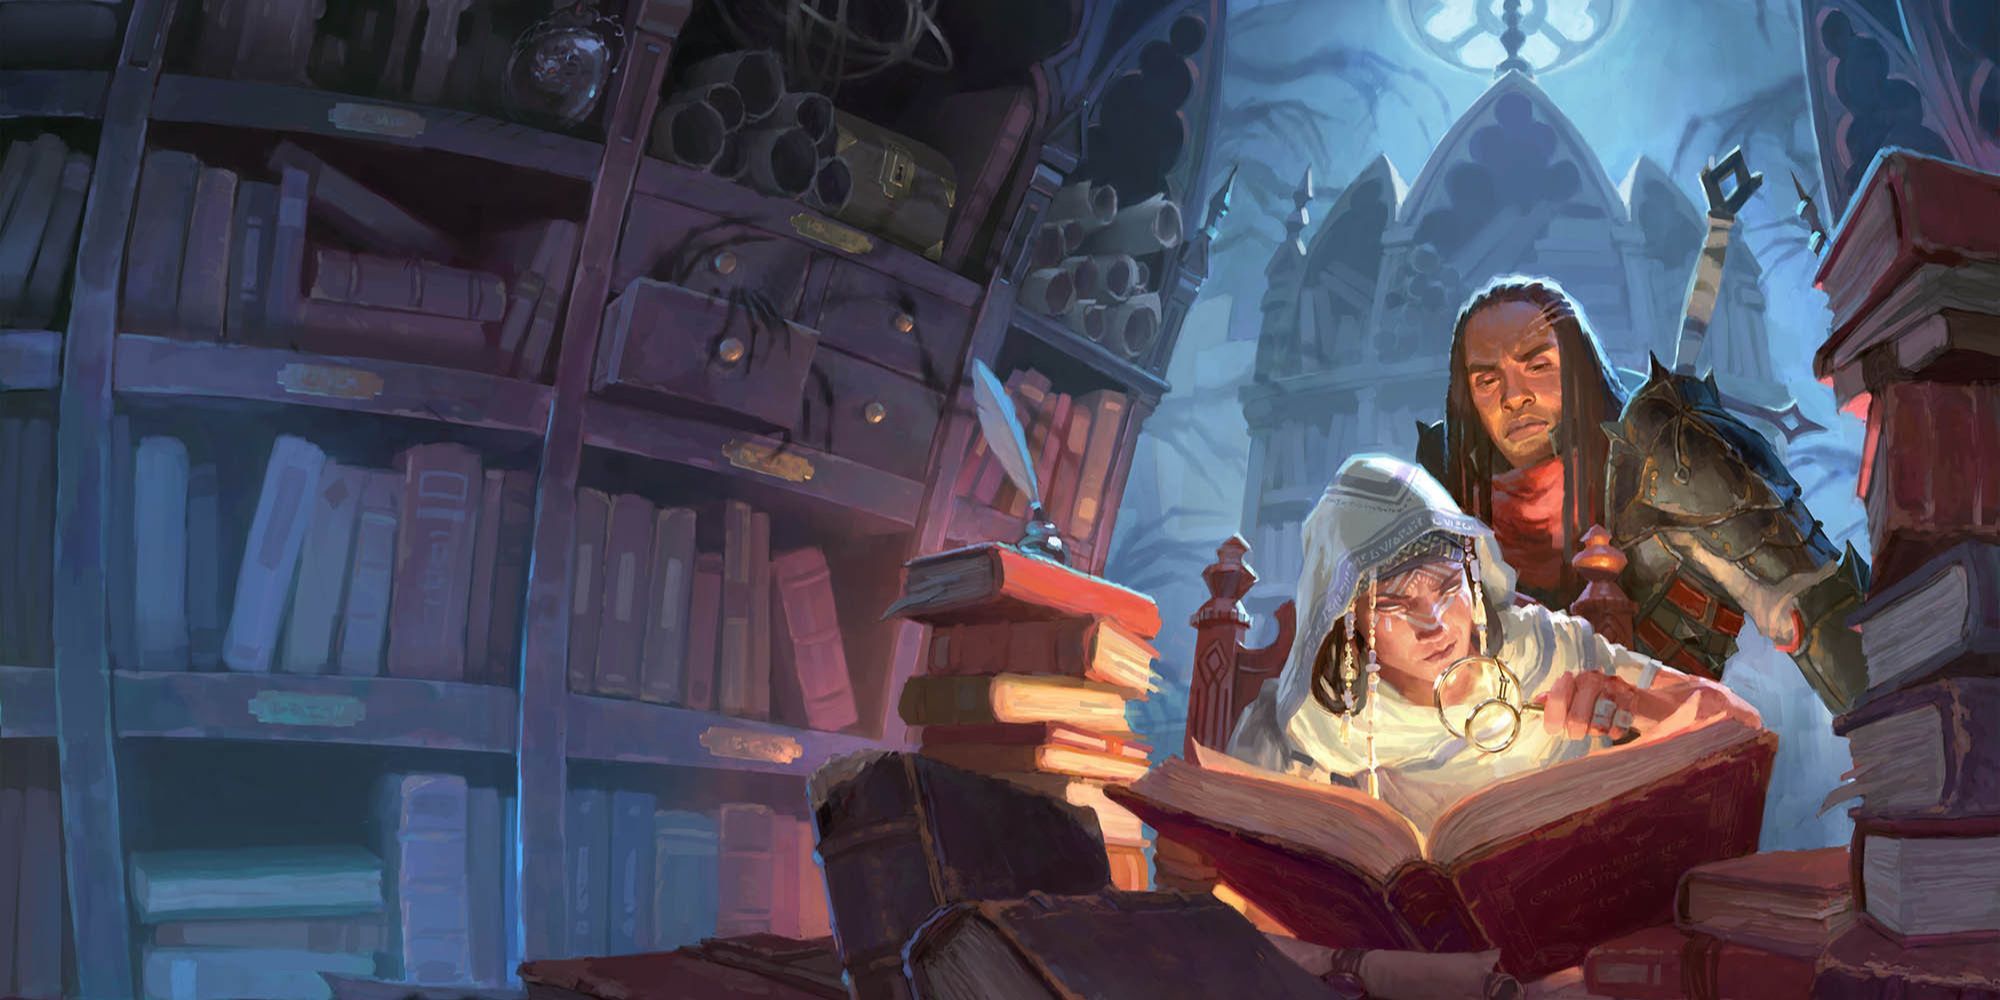 Dungeons And Dragons - Candlekeep Mysteries Cover Art of Adventurers Reading from a book in a old library